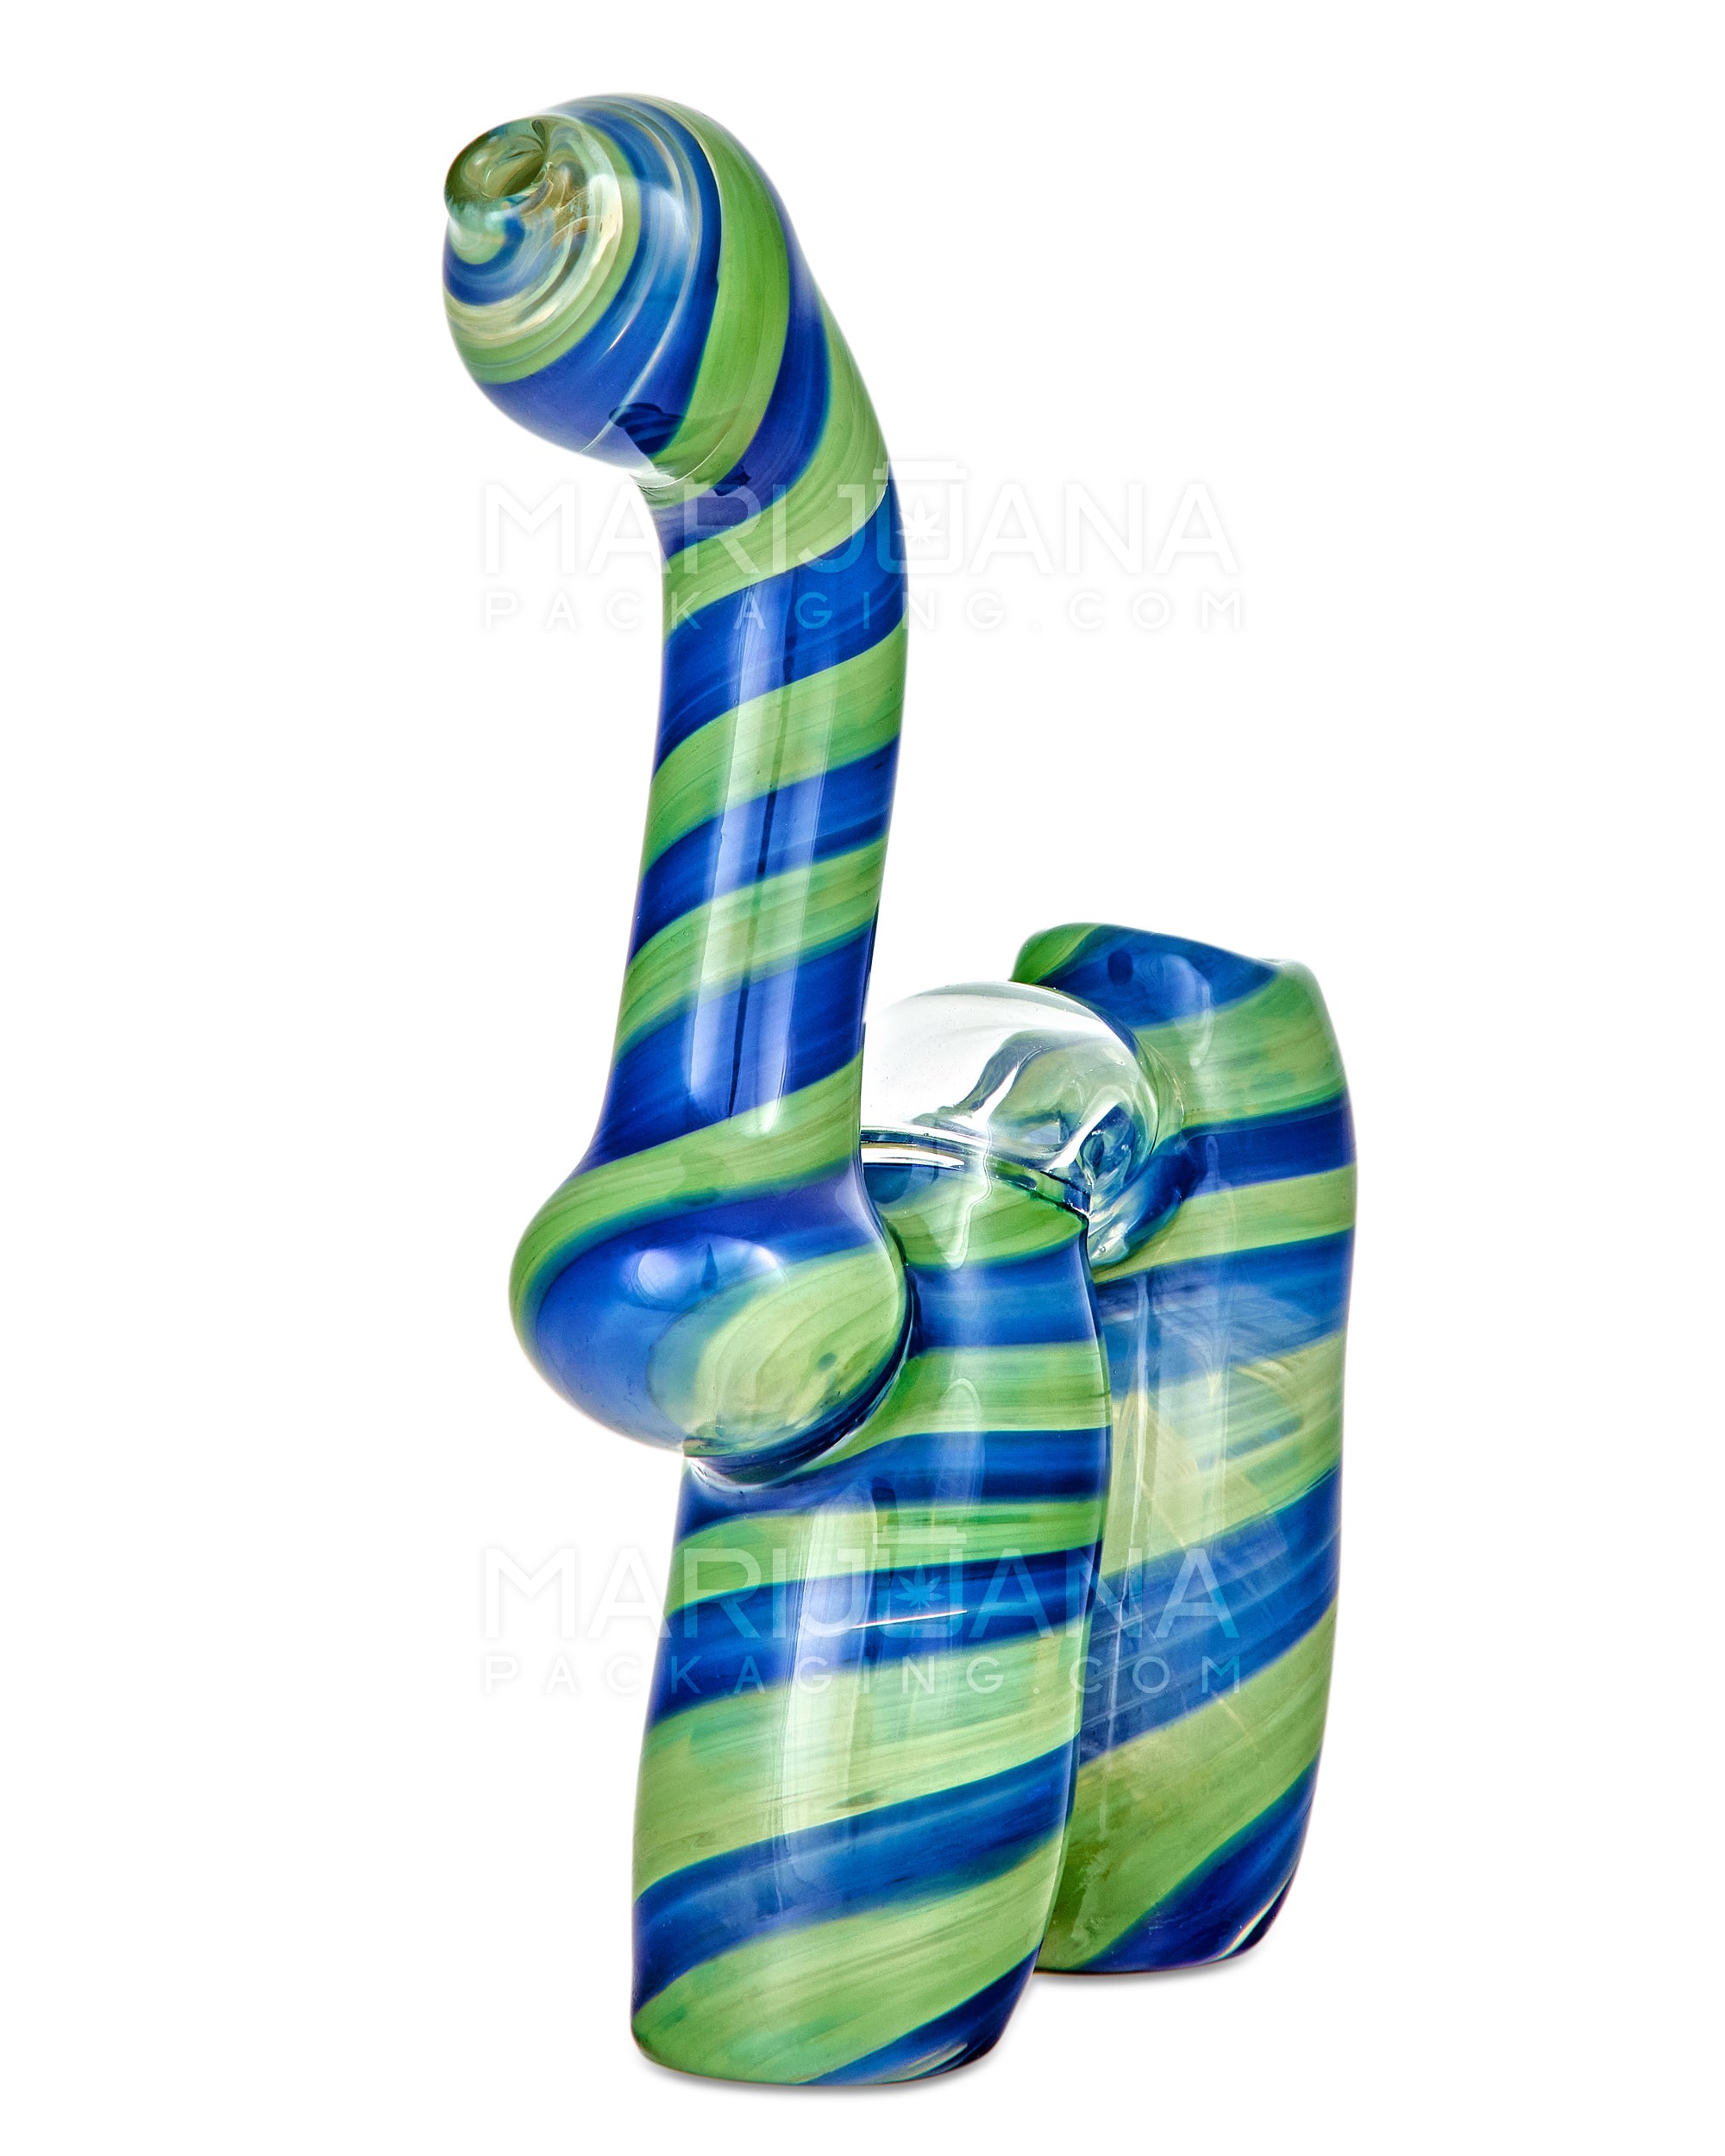 Spiral Double Chamber Bubbler | 6.5in Tall - Glass - Blue & Green - 3